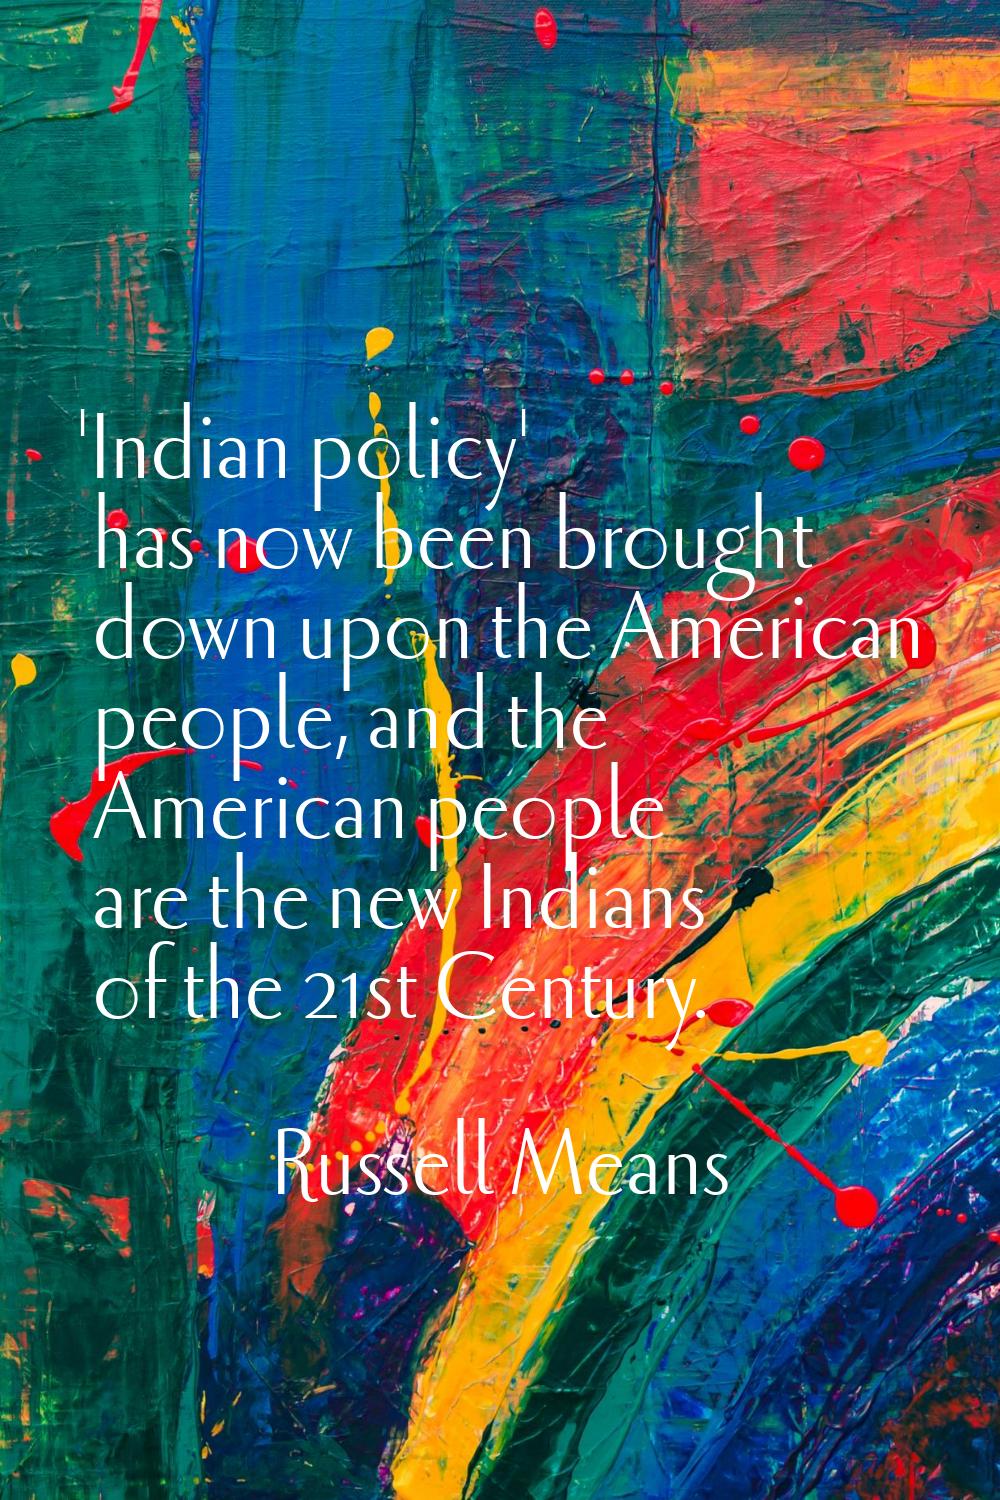 'Indian policy' has now been brought down upon the American people, and the American people are the